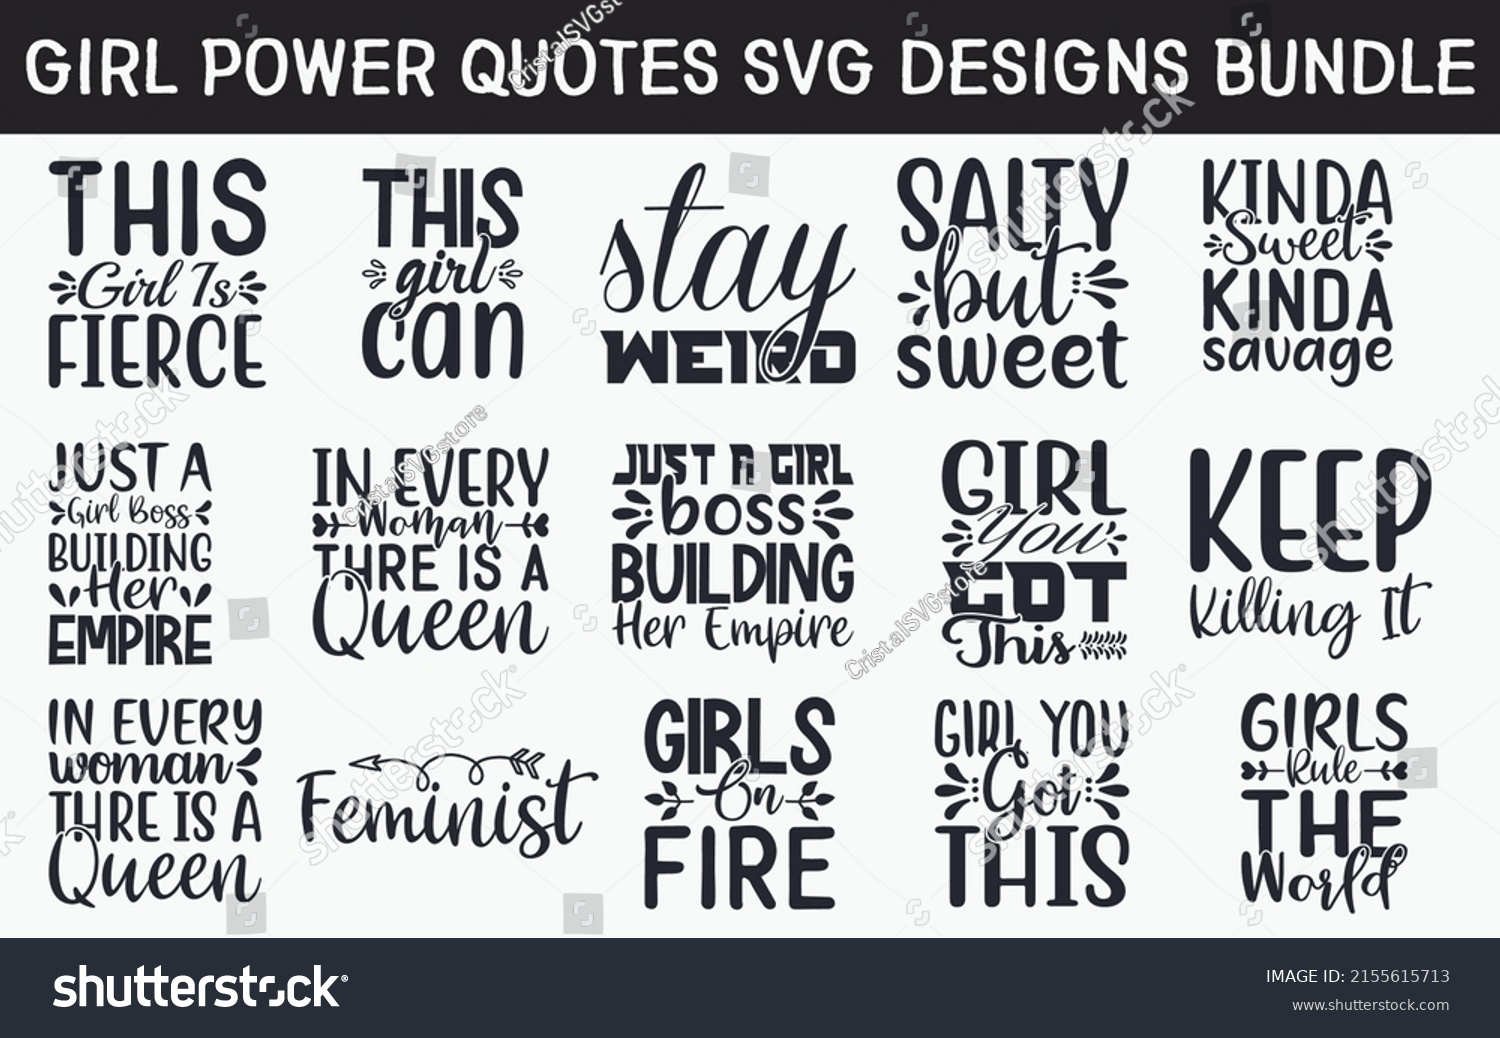 SVG of Girl power Quotes SVG Cut Files Designs Bundle, Girl power quotes SVG cut files, Girl power quotes t shirt designs svg